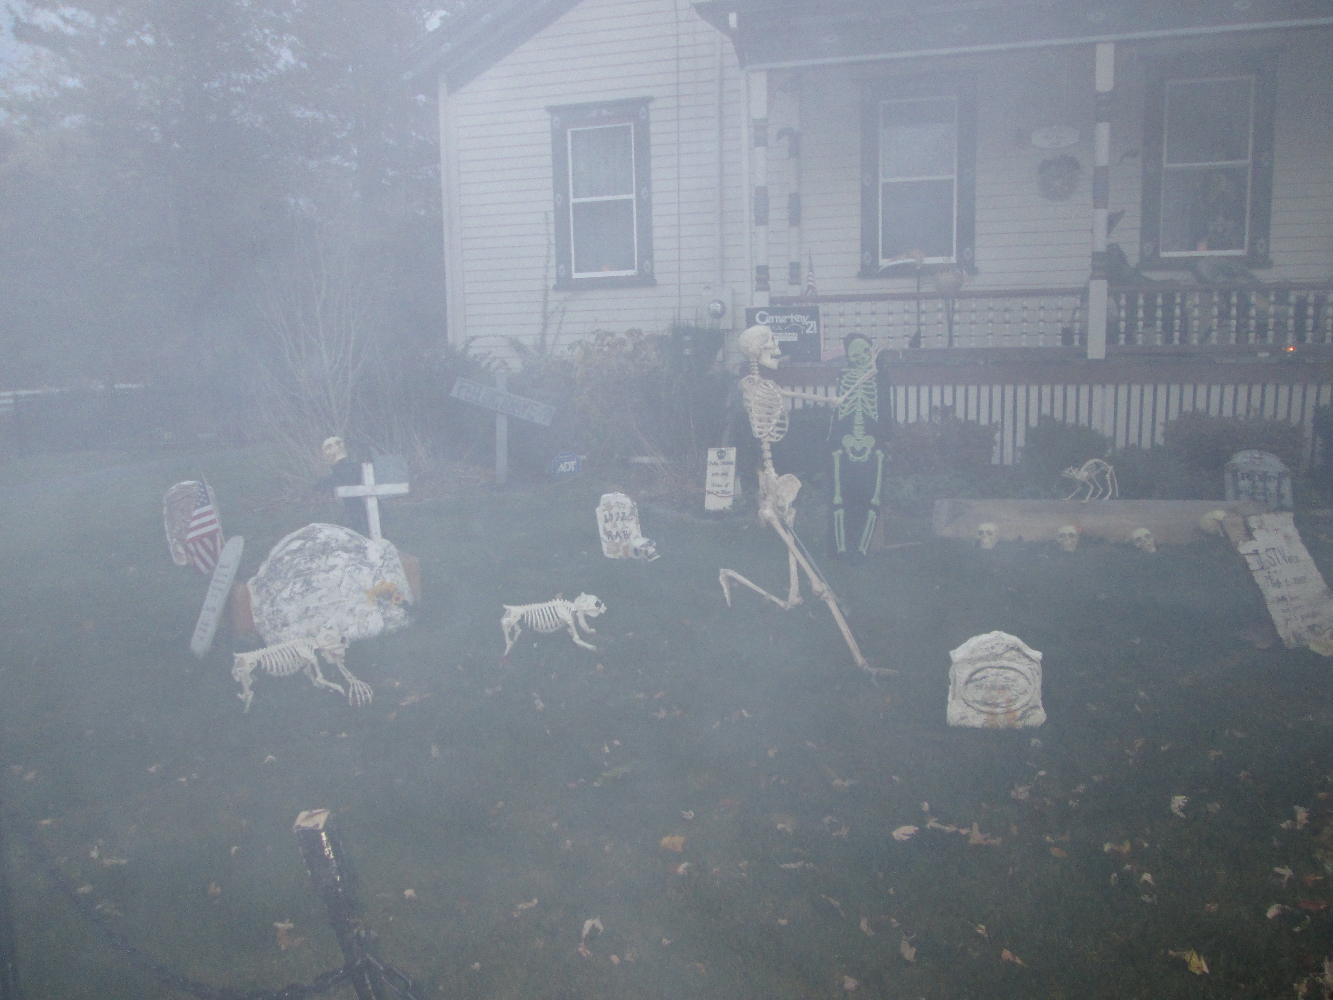 The yard in fog. We put real candles in jars for a real effect.